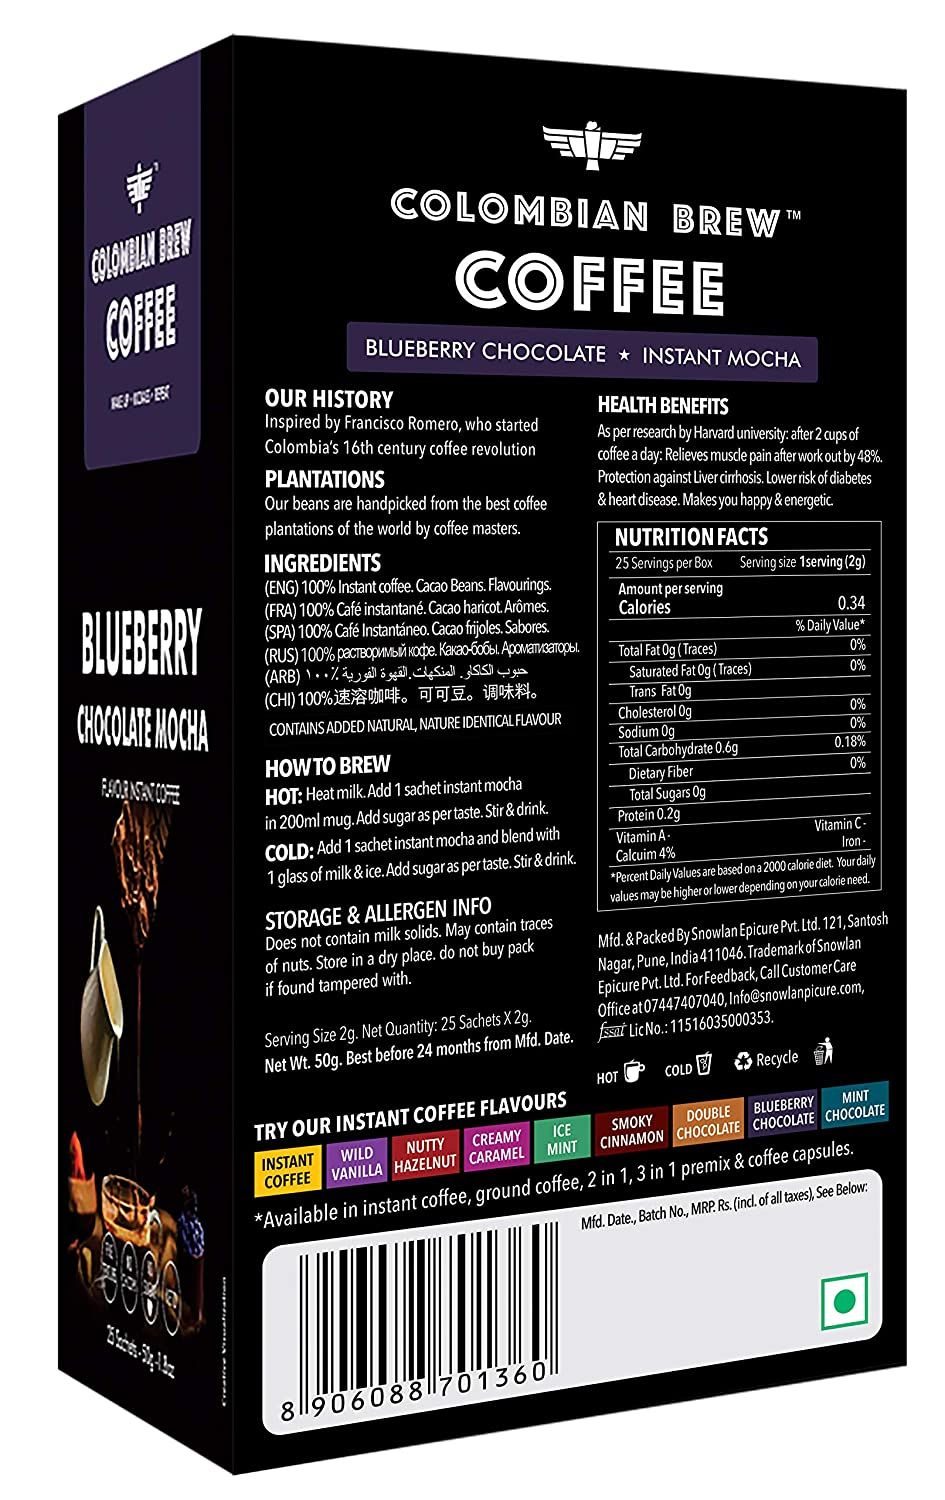 Colombia Brew Coffee Blueberry Chocolate Mocha Instant Coffee Image